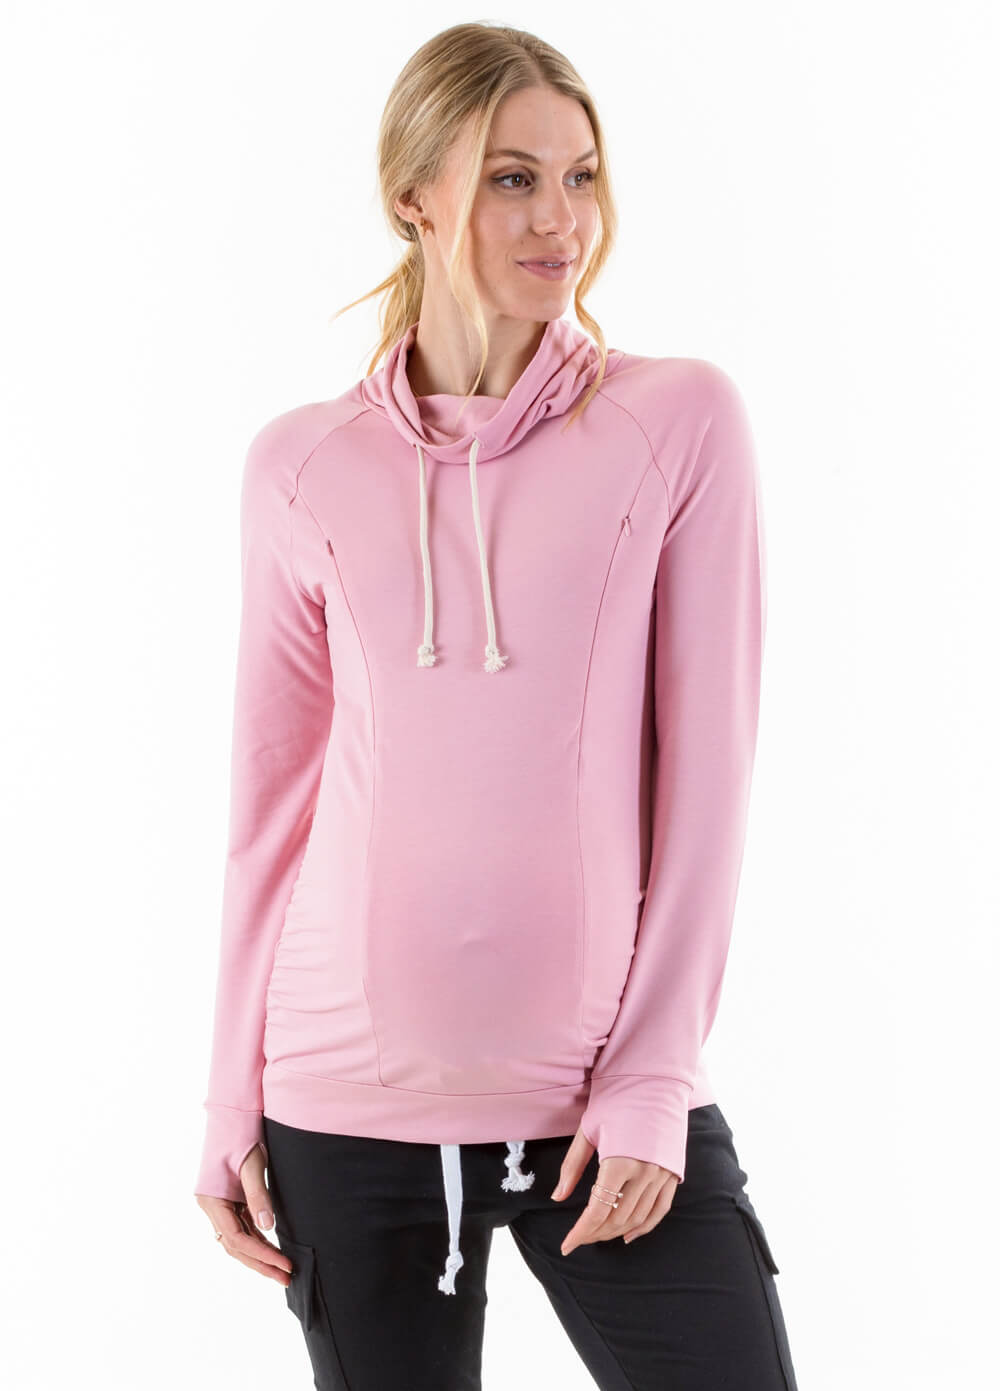 Ayette Cowl Neck Maternity Nursing Pullover in Pink by Lait & Co